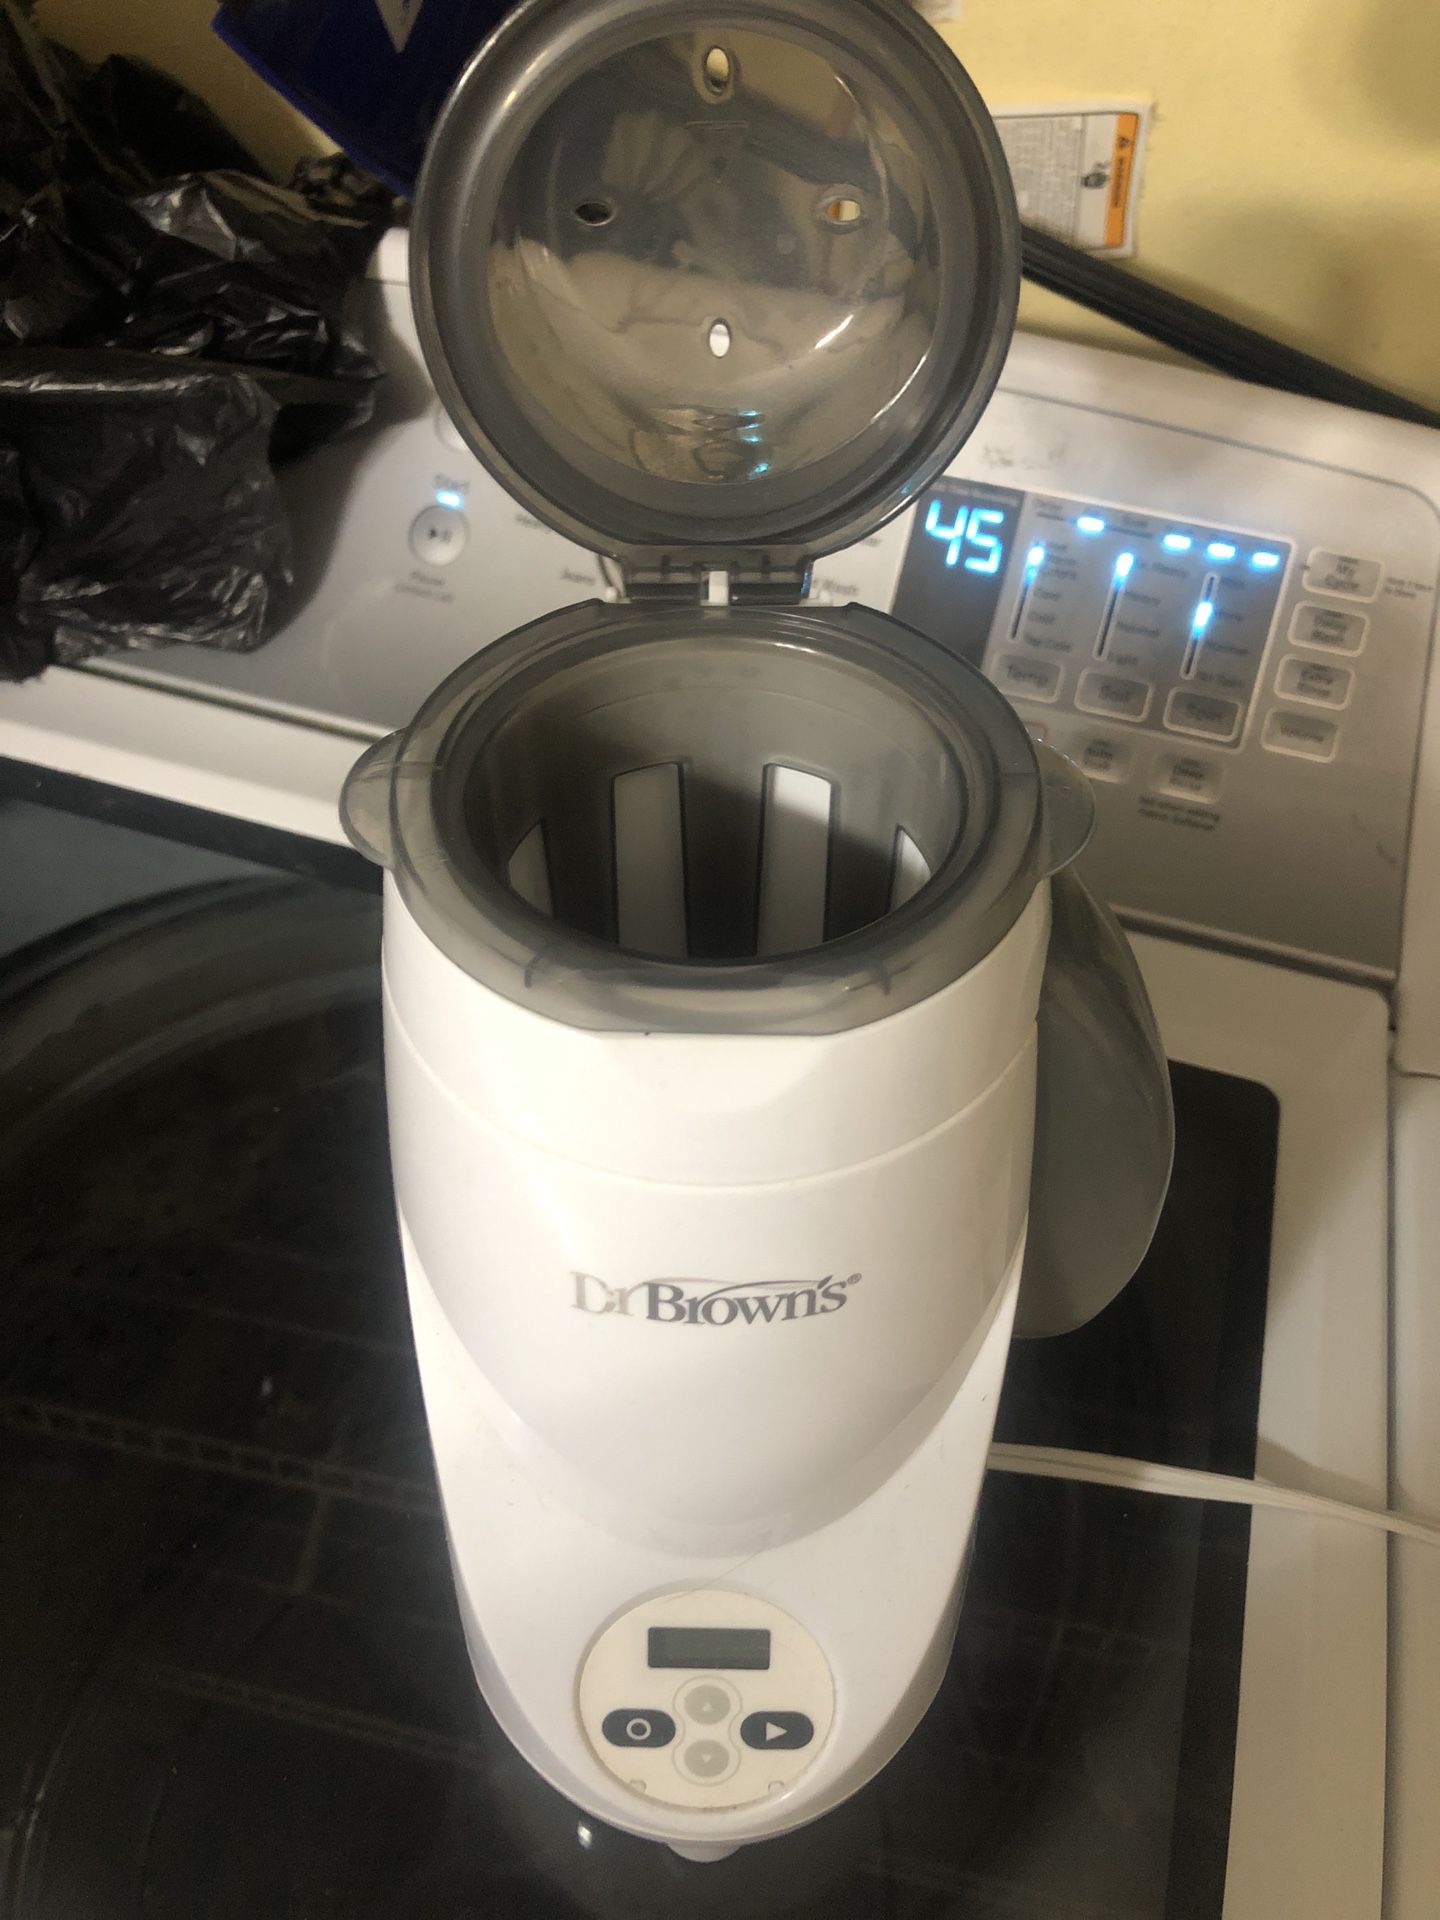 Dr brown sterilizer and bottle warmer. It’s a great item